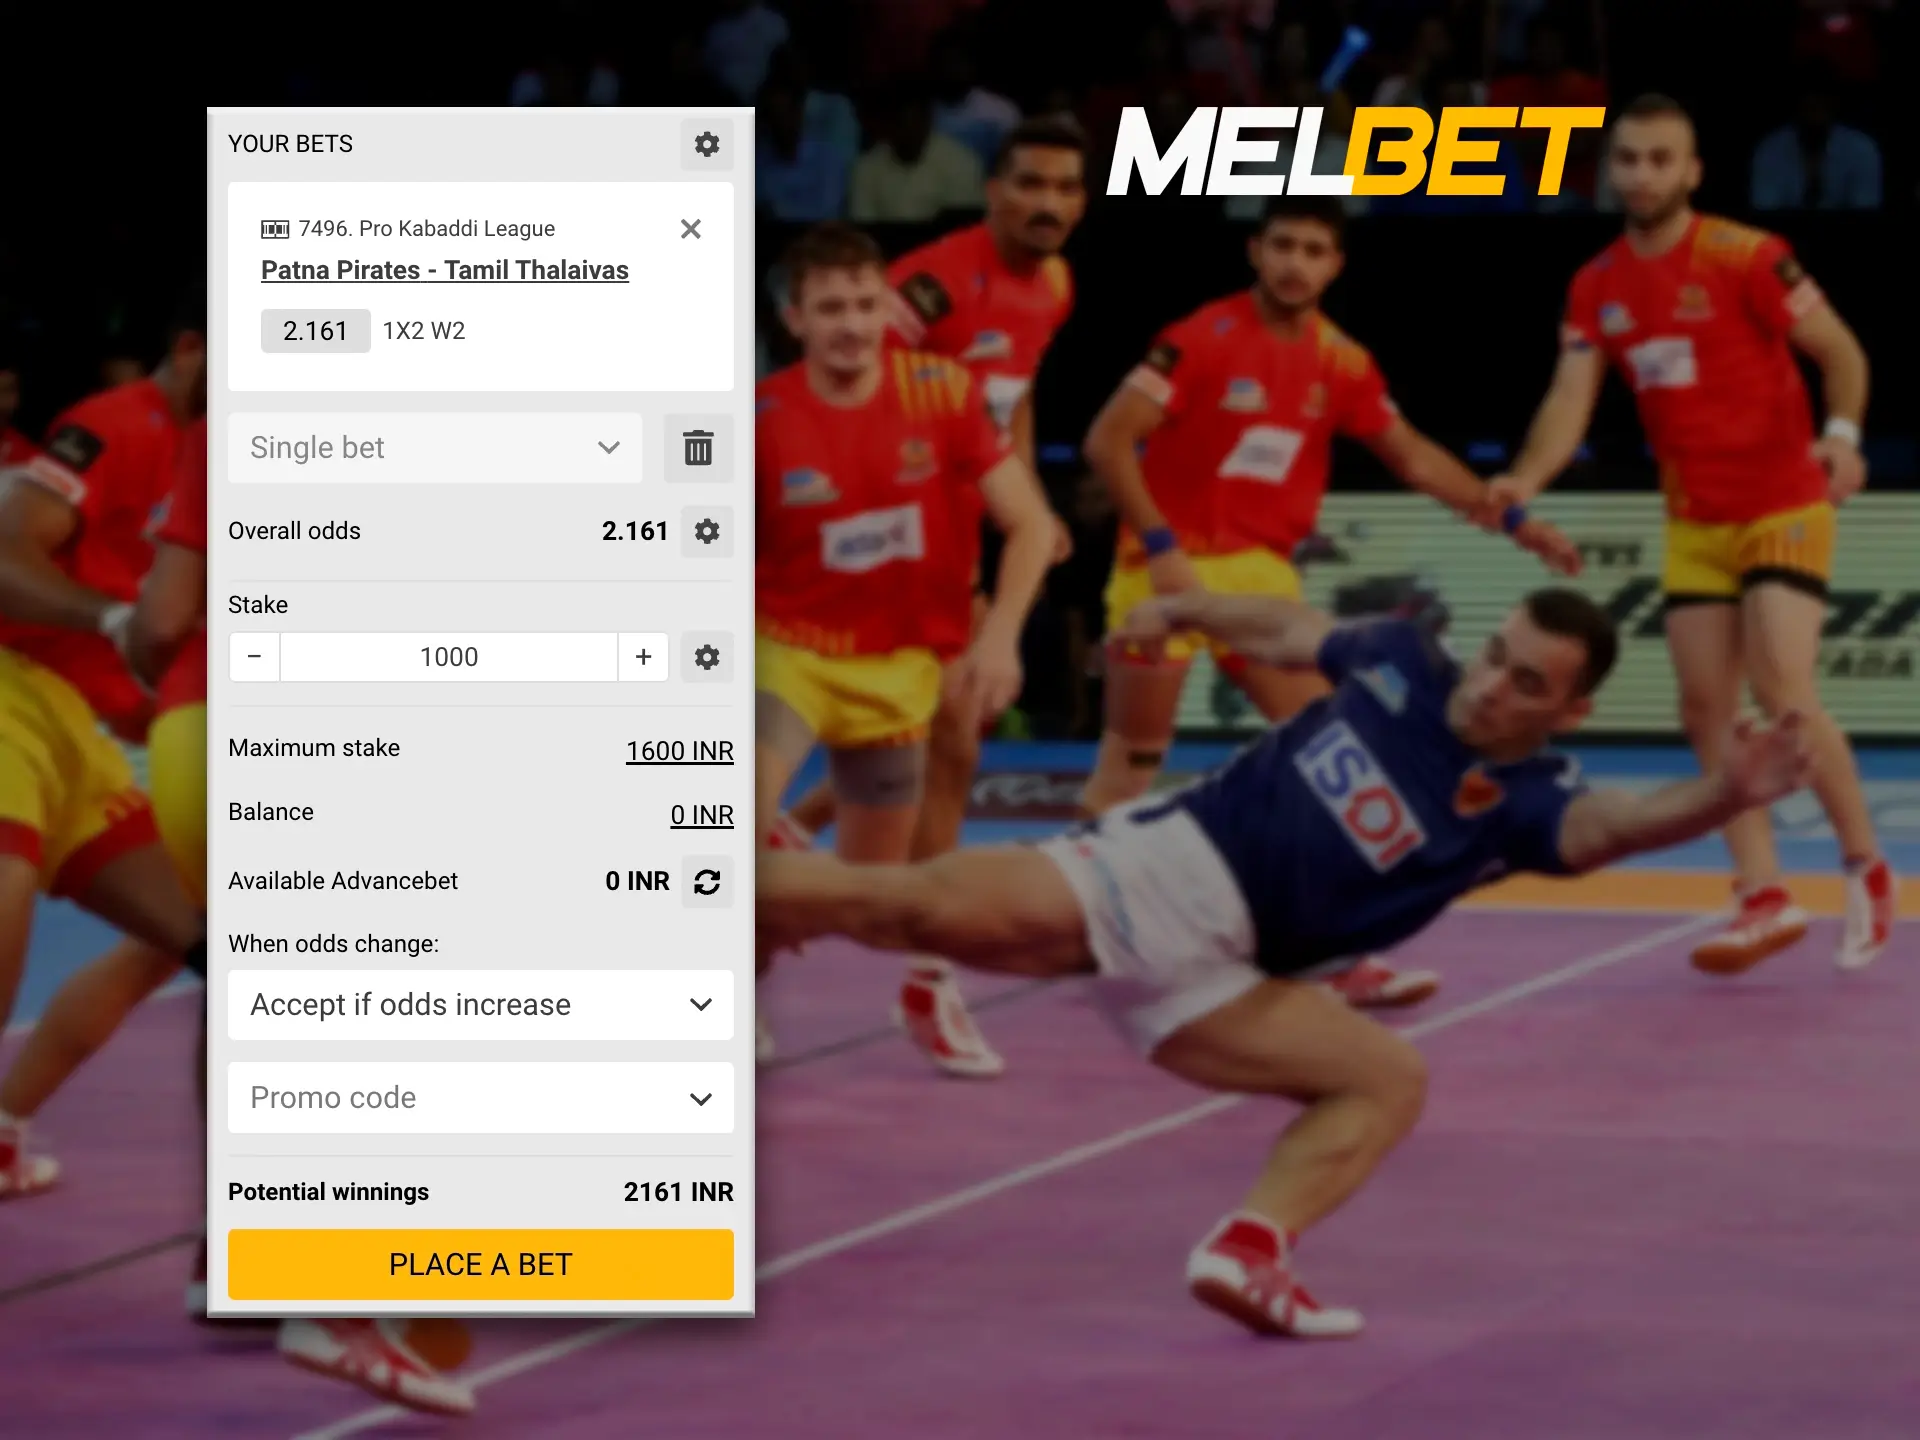 Melbet is one of the leaders in Kabaddi odds among bookmakers in India.